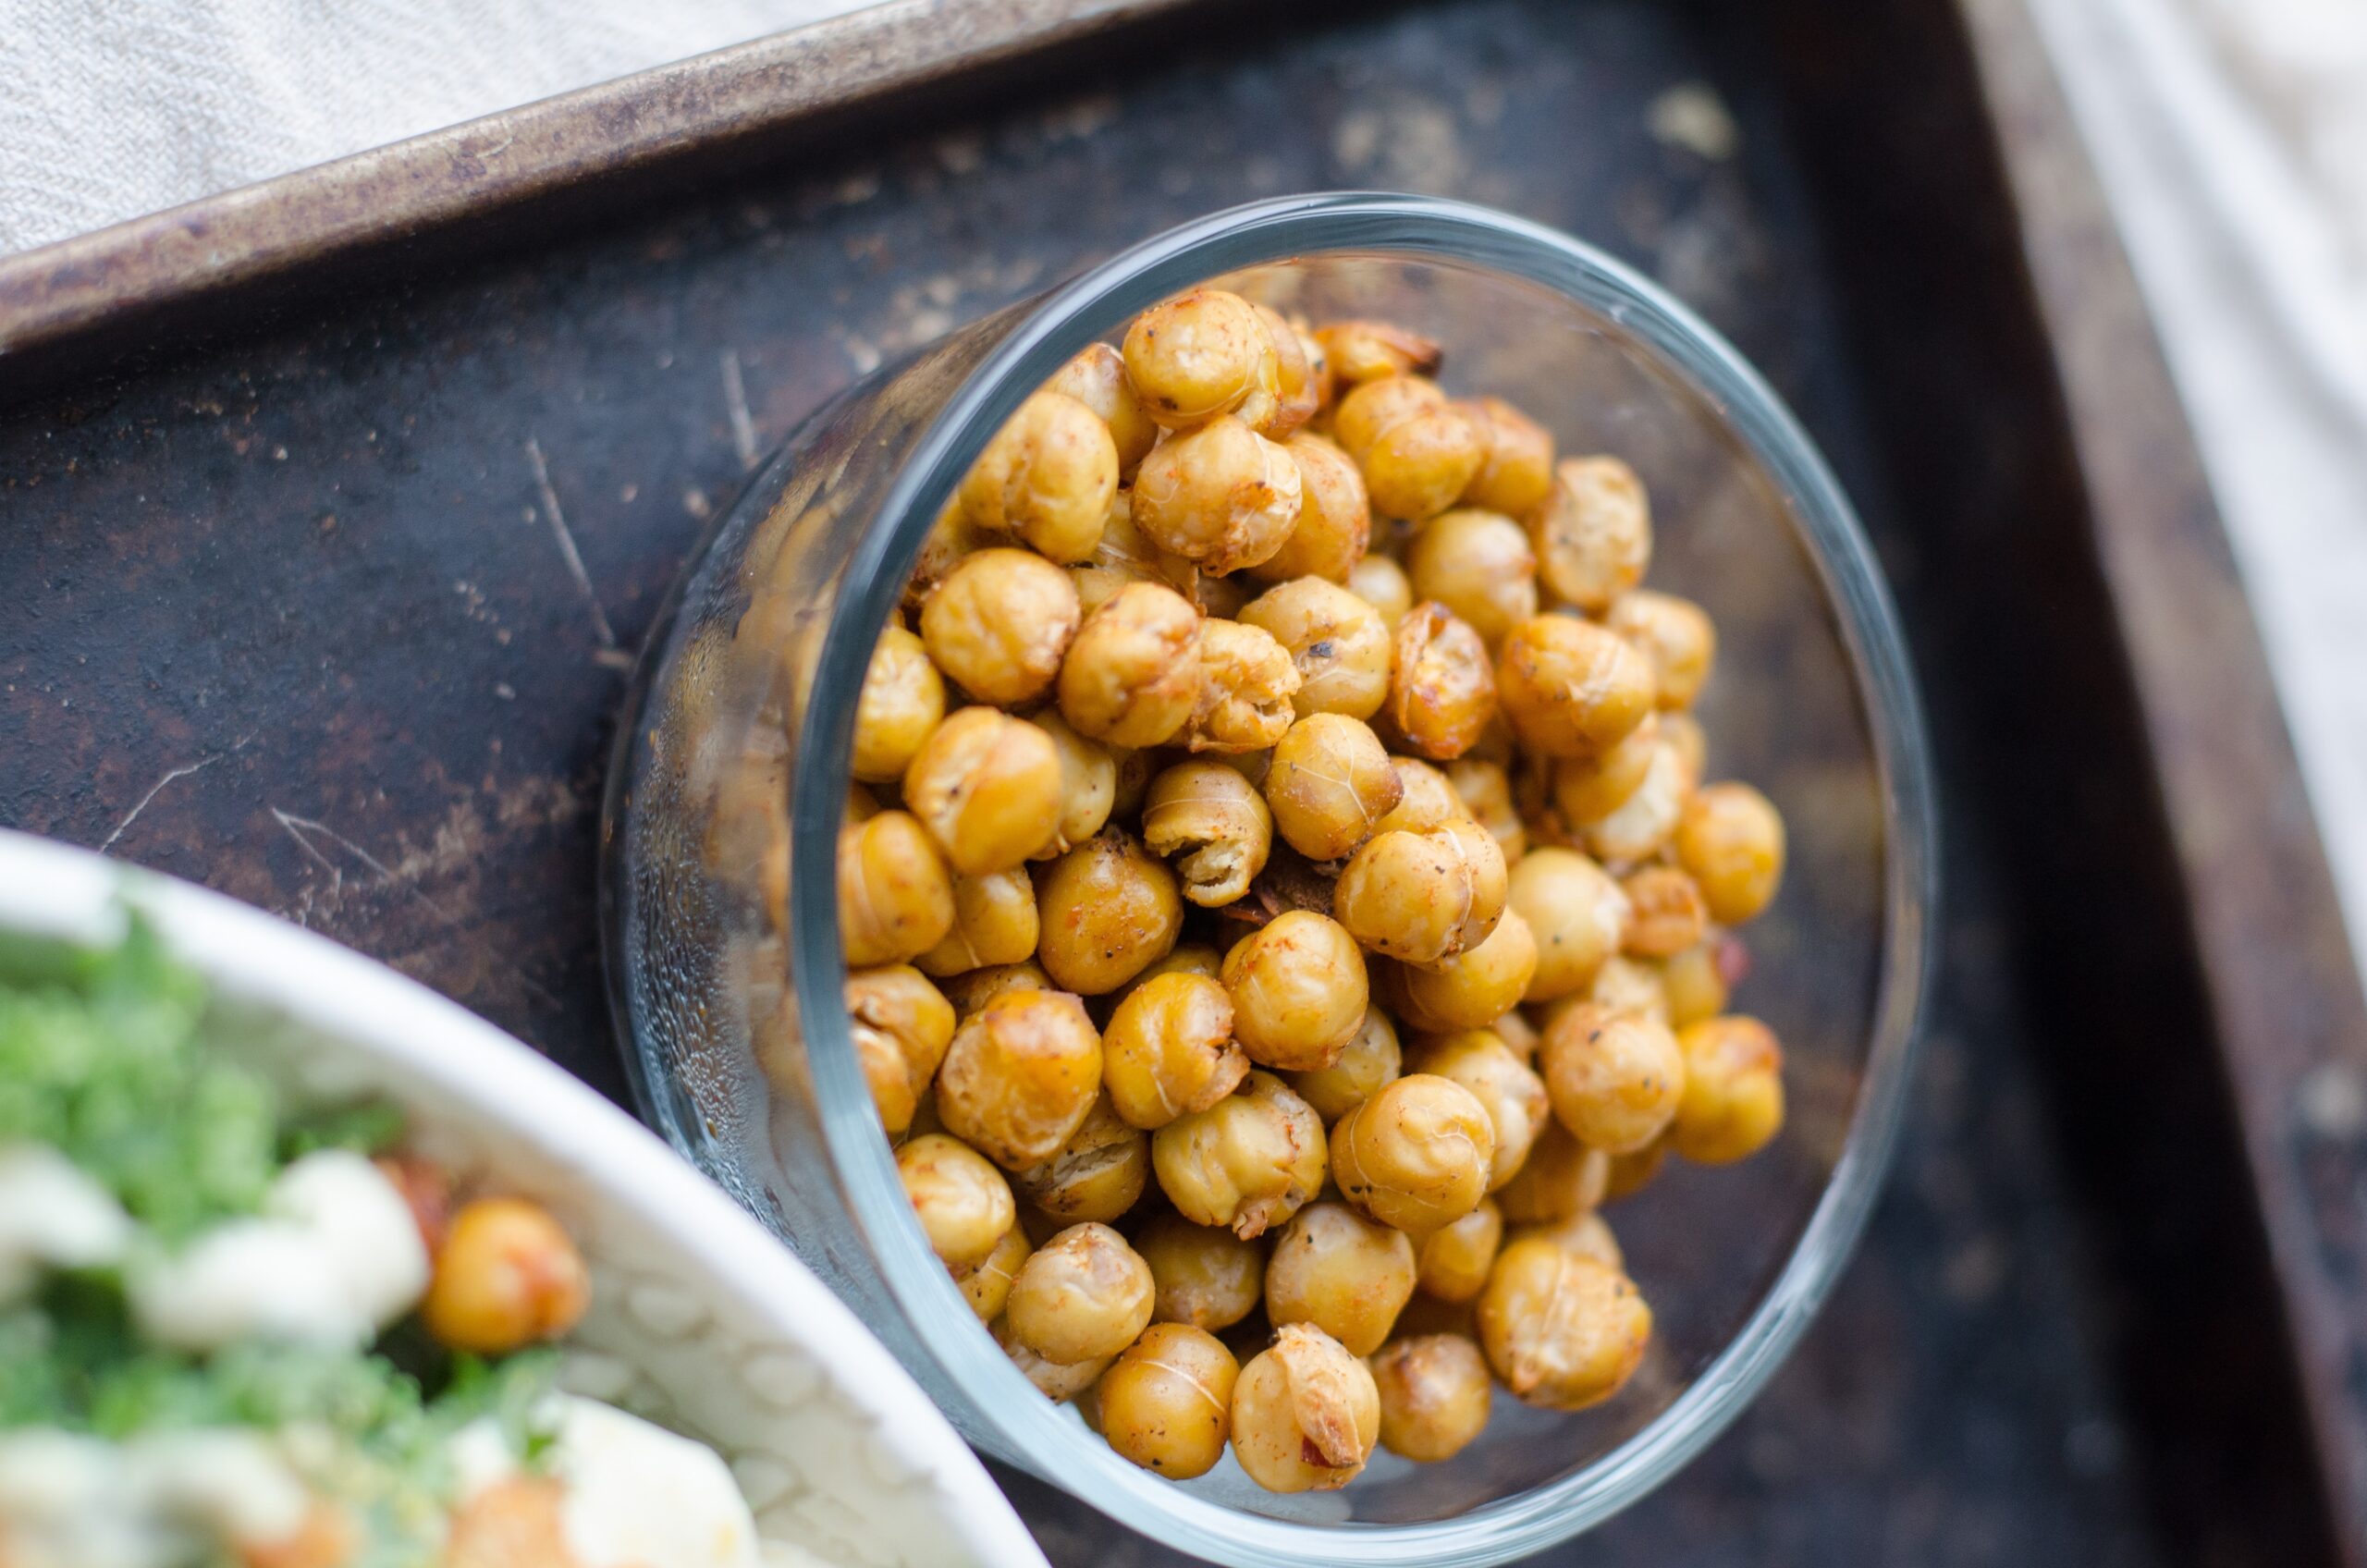 chick pea and apple salad with fennel